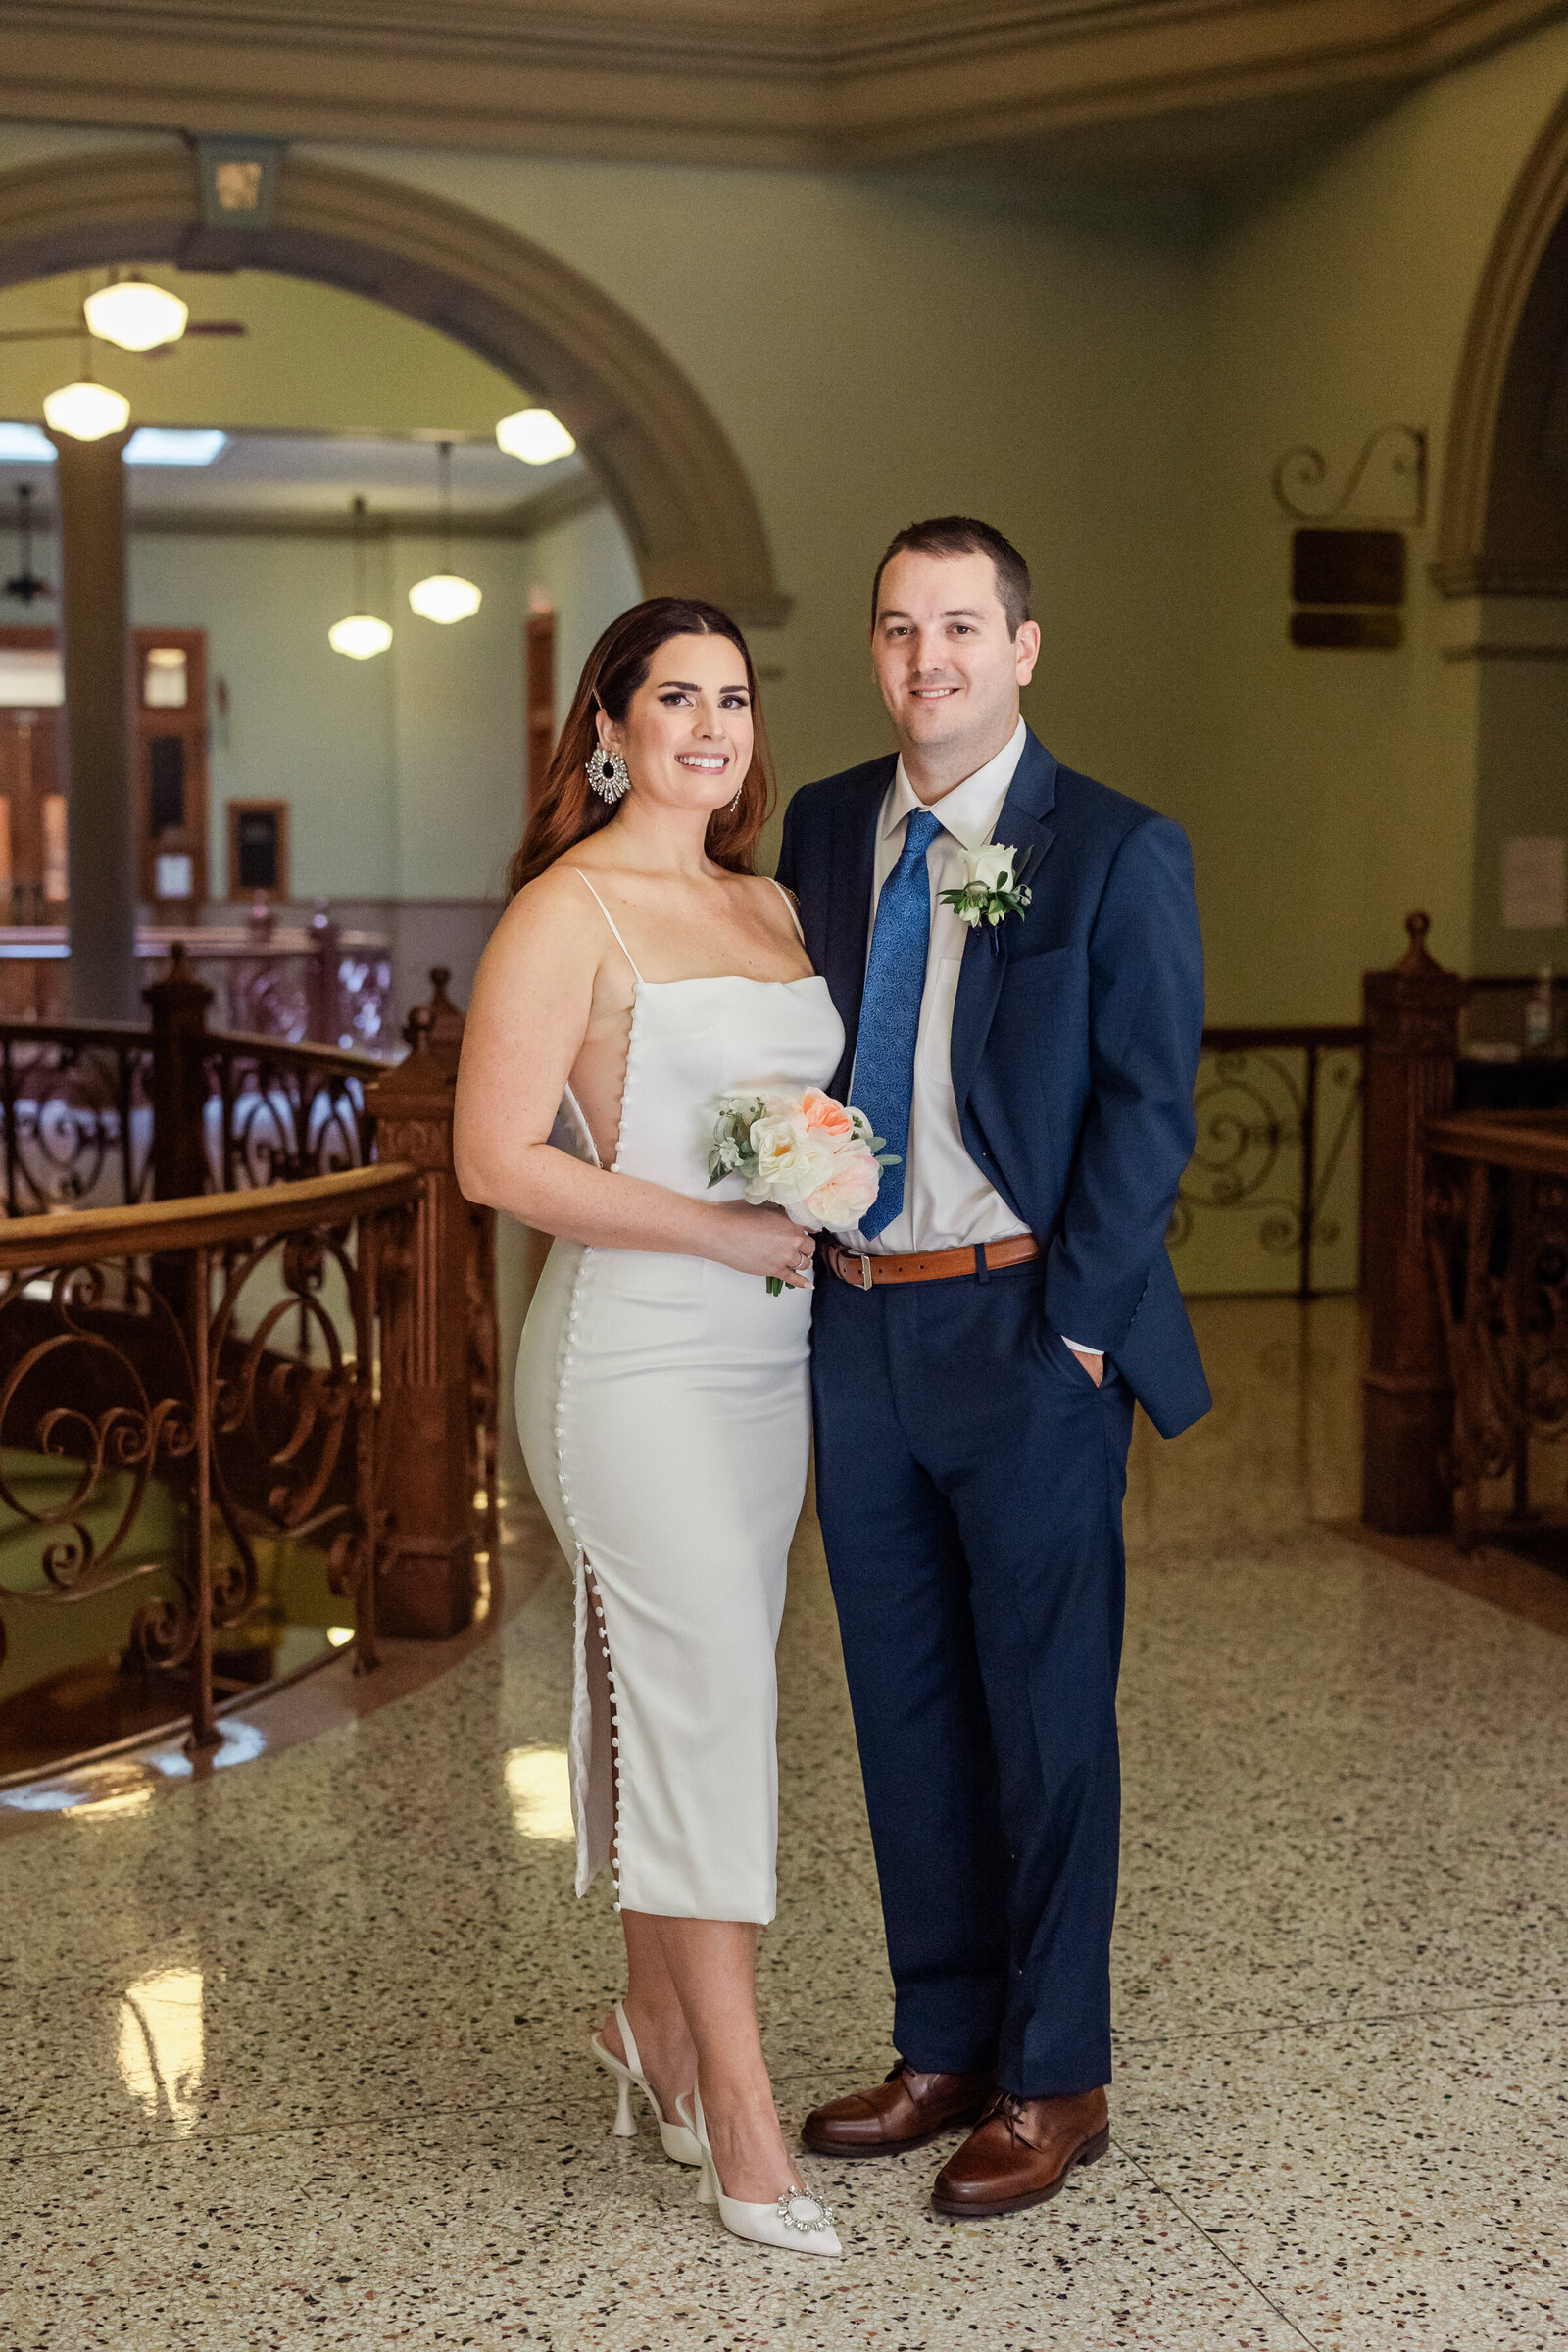 Bride and groom posing together on the top floor of the beautiful Tarrant County Courthouse in Fort Worth, Texas. The bride is on the left and is wearing a short white dress and white heels while holding a bouquet. The groom is on the right and is wearing a blue suit with brown dress shoes.